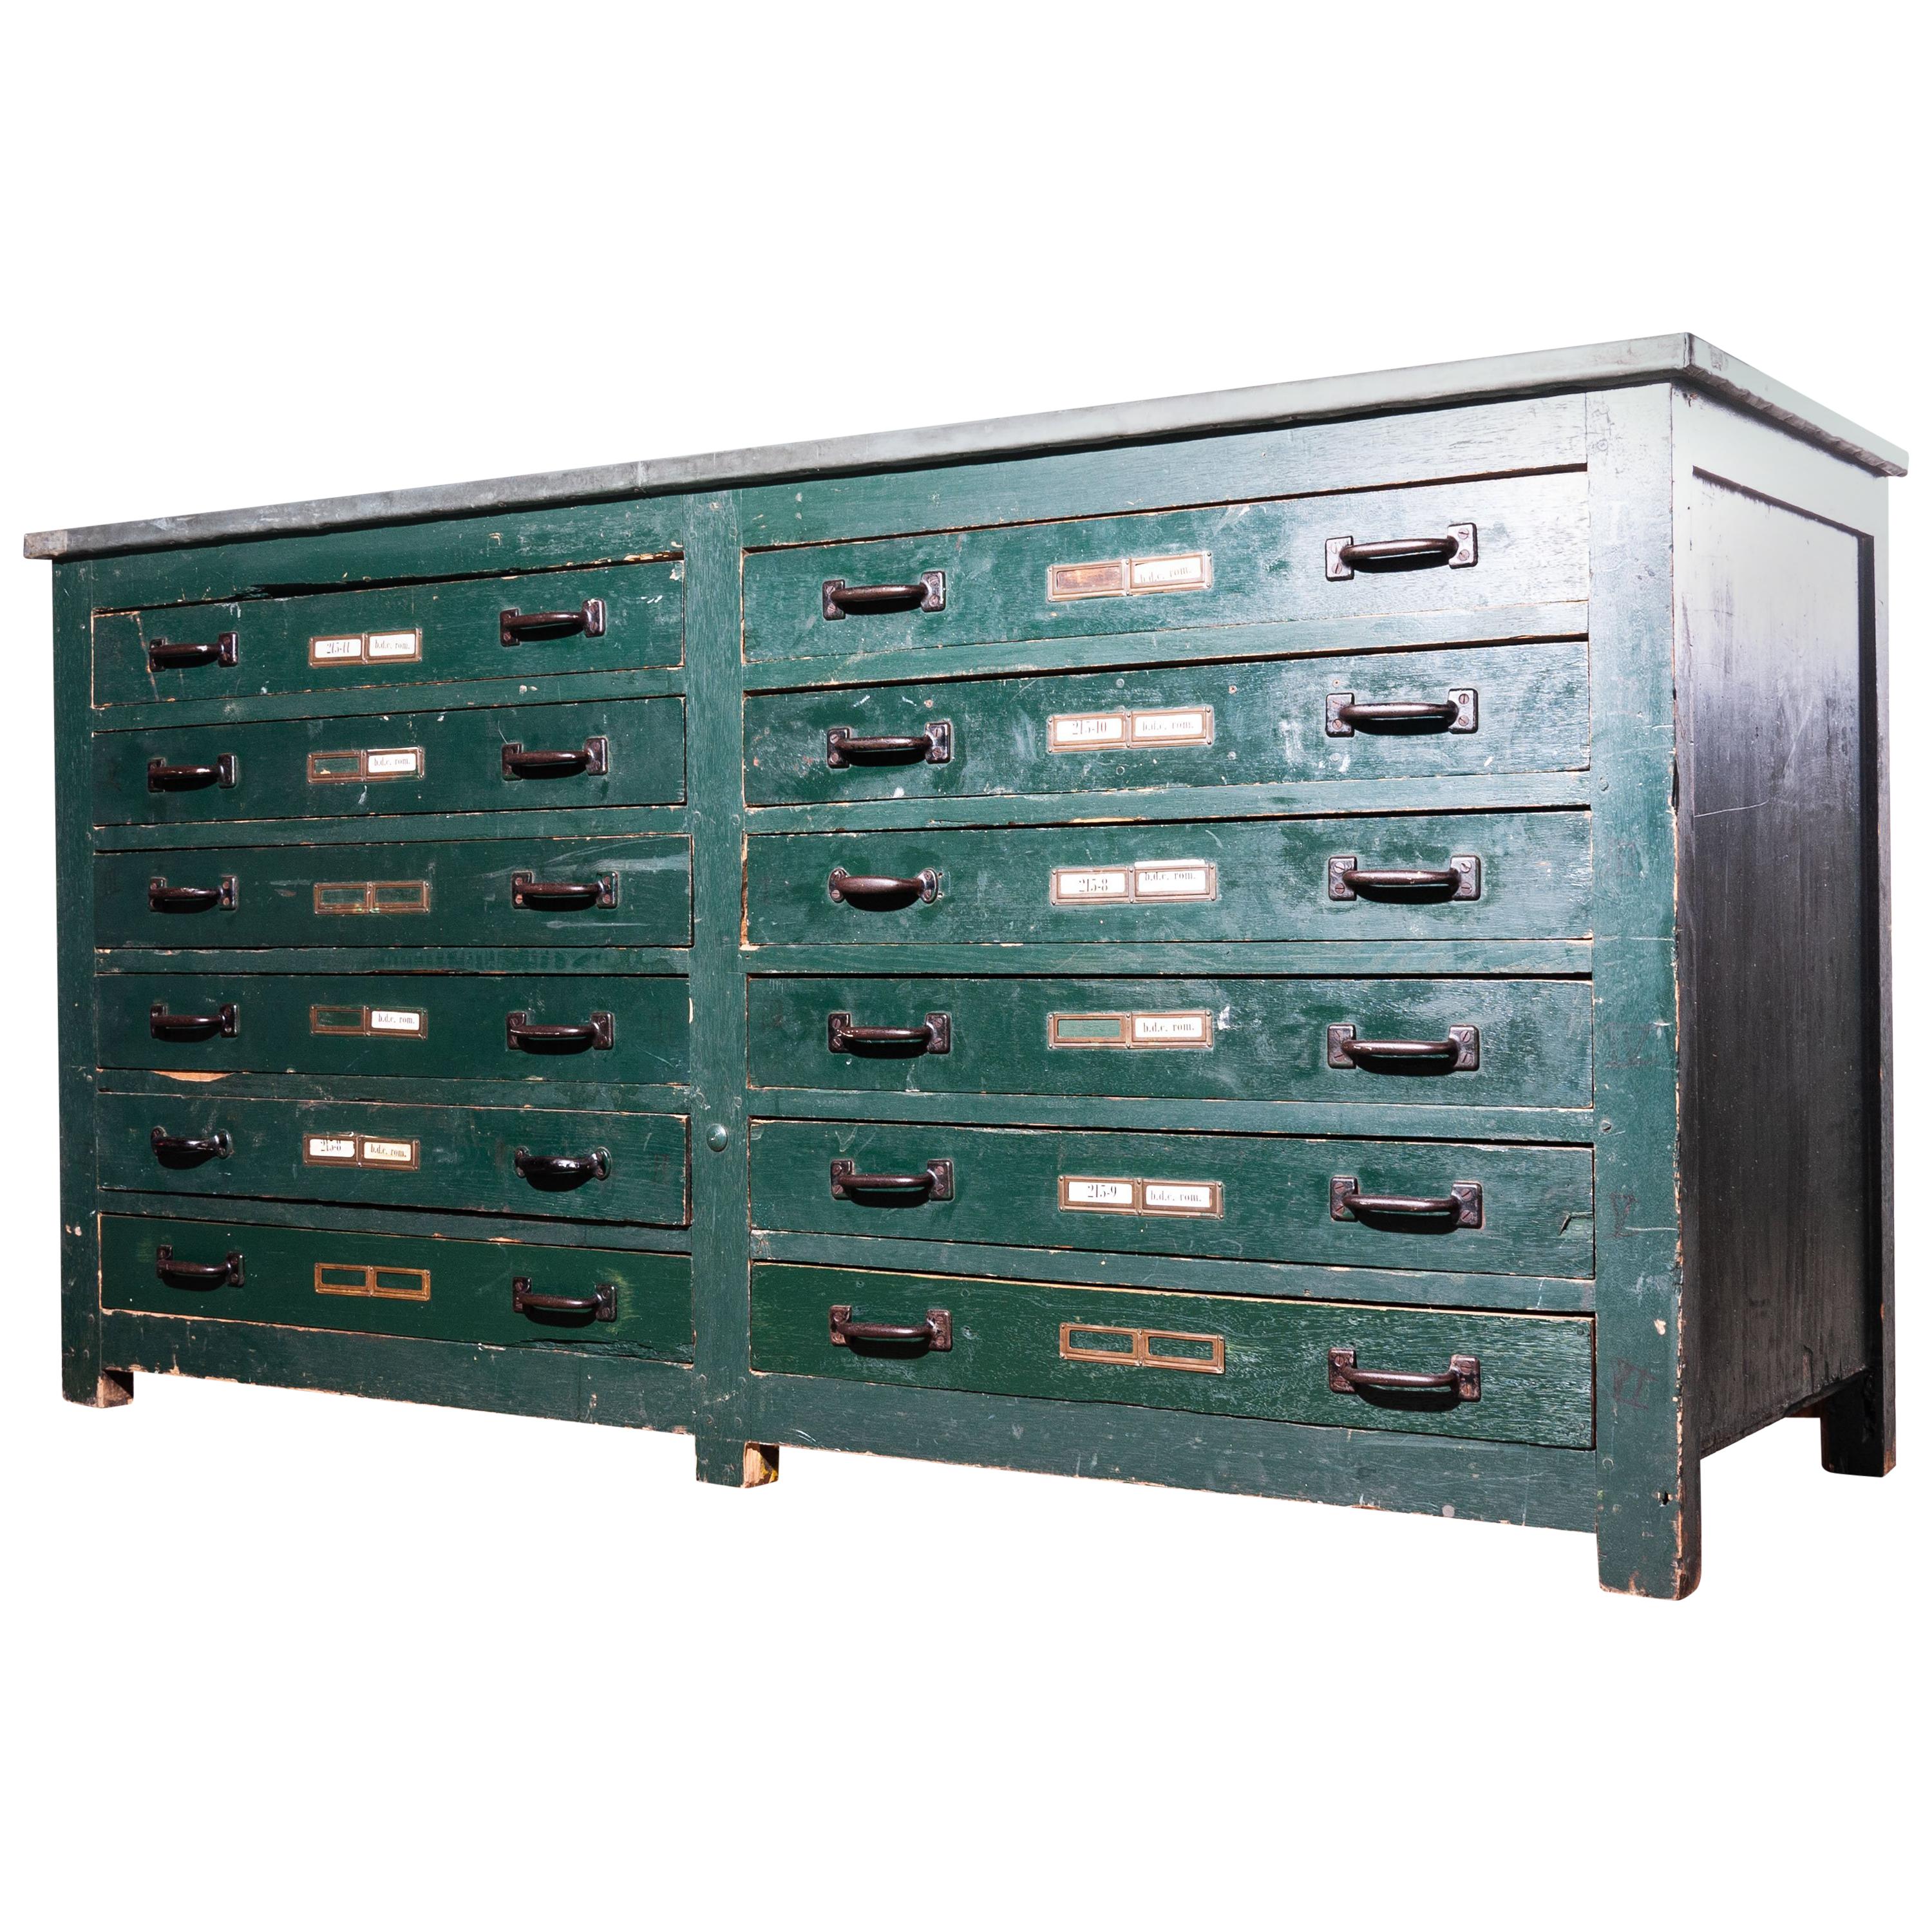 1940s English Industrial Cabinet, Chest of Drawers, Sideboard with Zinc Top